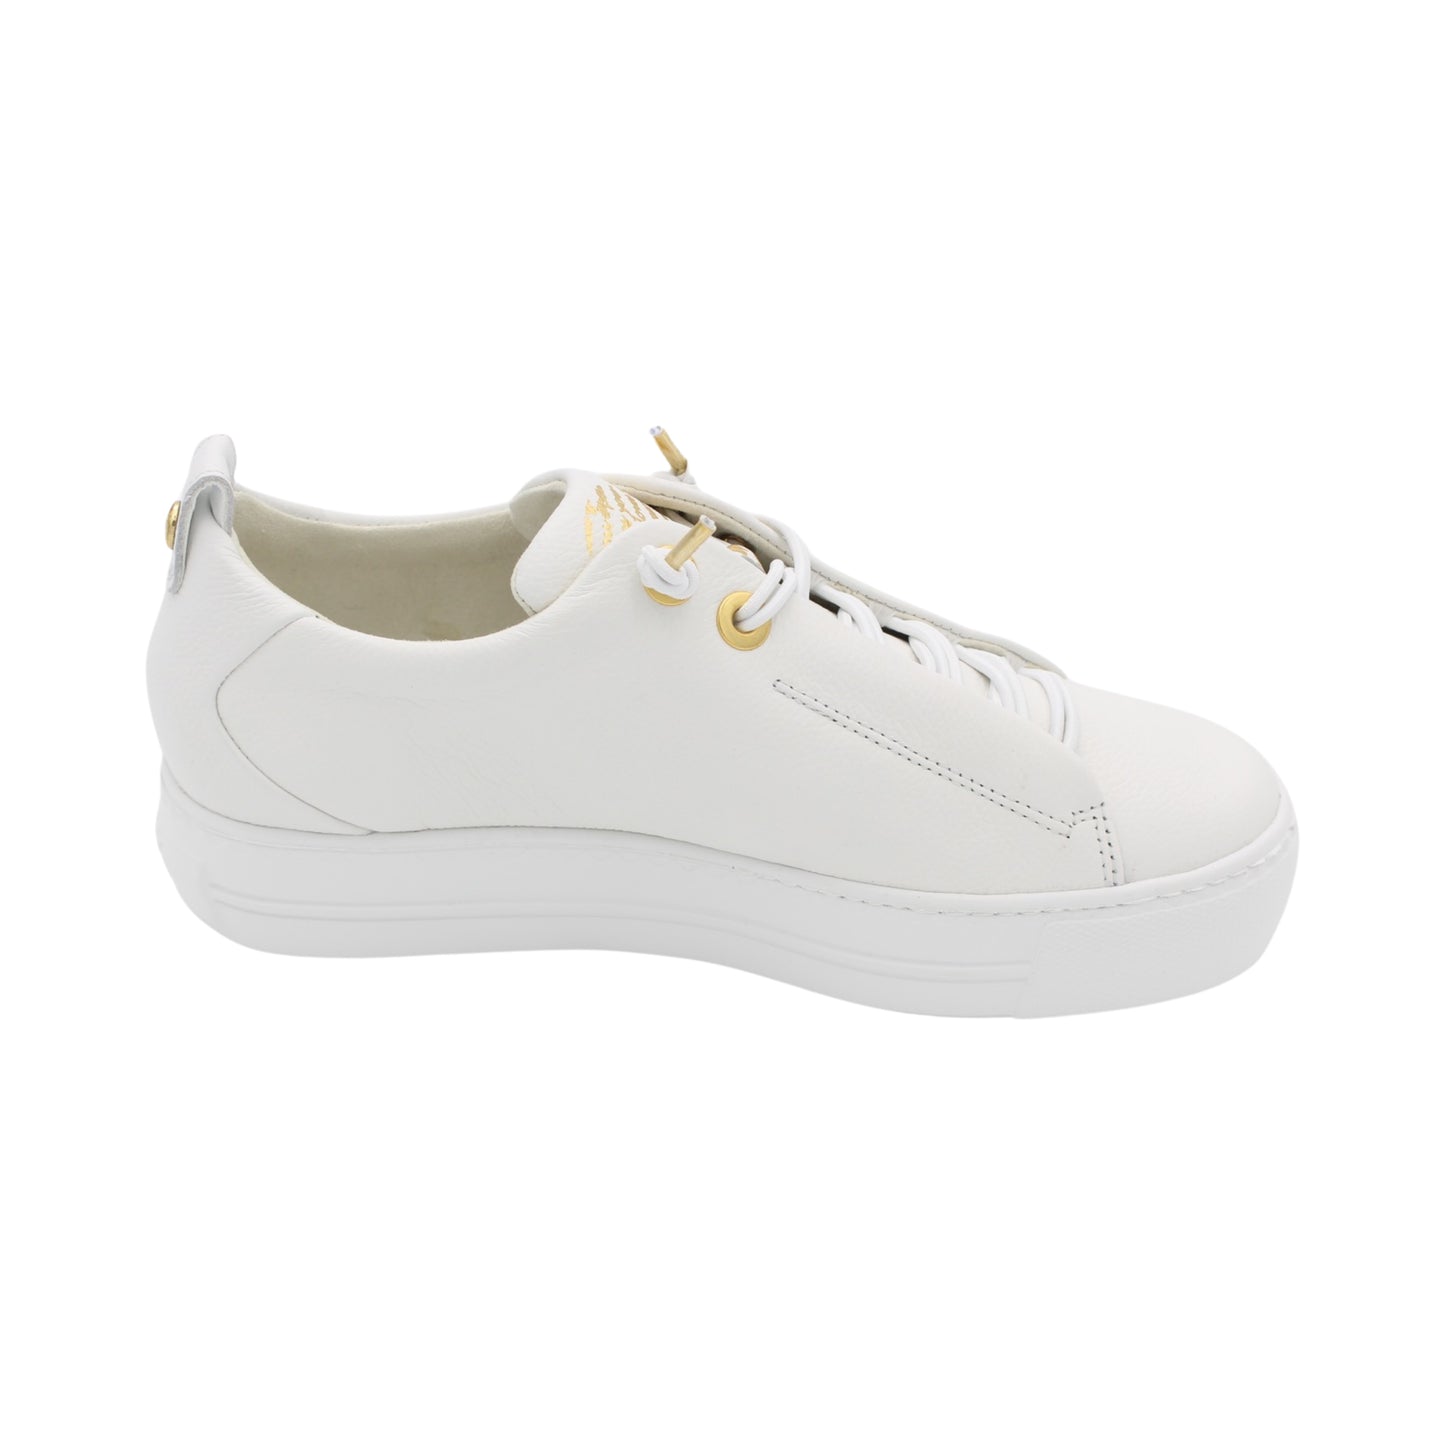 Paul Green - Ladies Shoes Trainers White, Gold (1842)